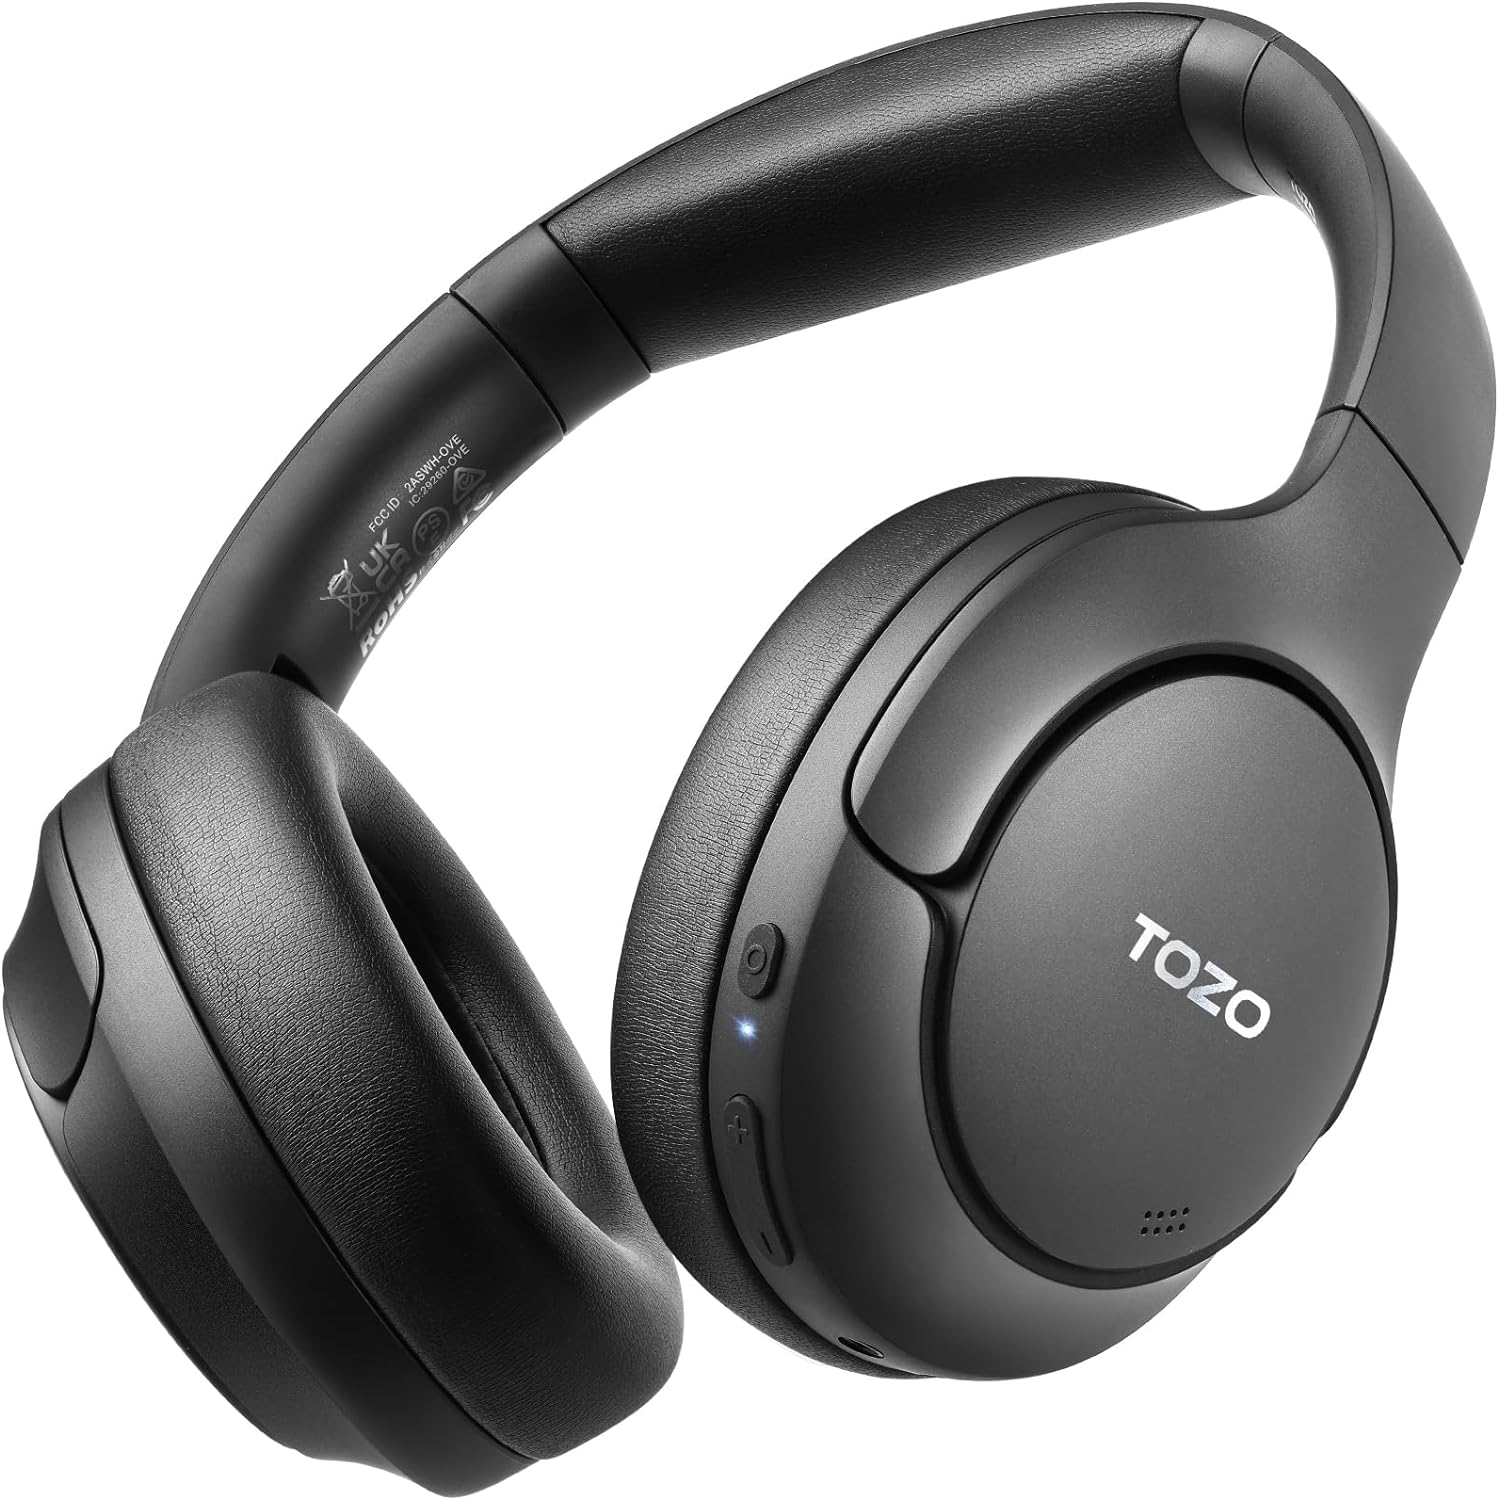 Noise Cancelling Headphones, Wireless Over Ear Bluetooth